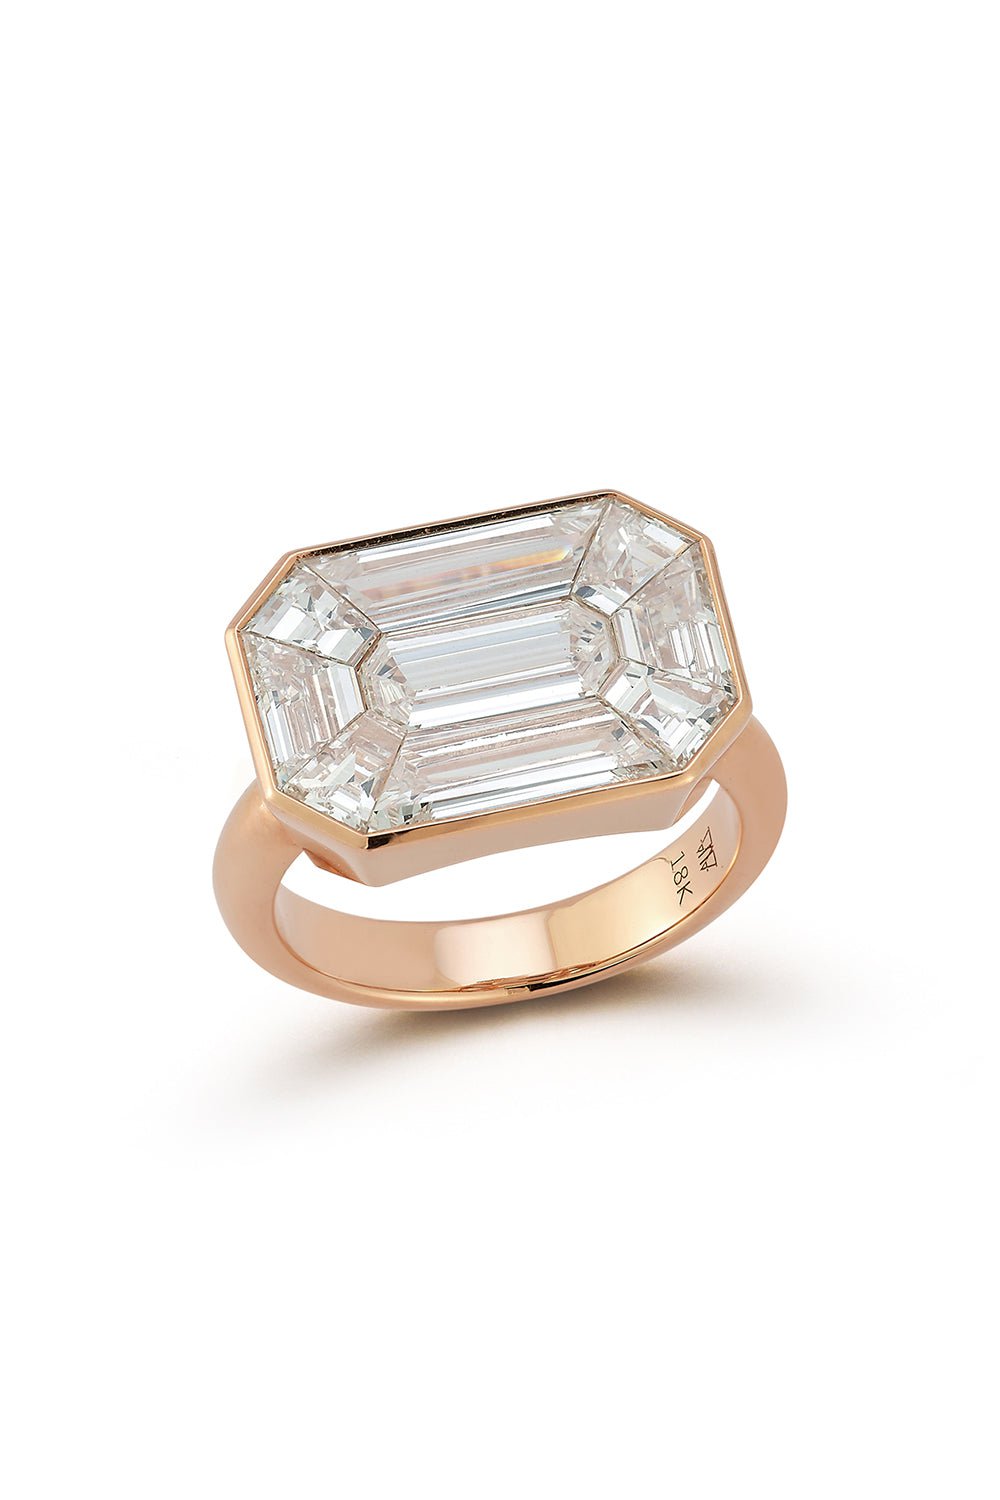 WALTERS FAITH-Thoby Large Illusion East West Ring-ROSE GOLD